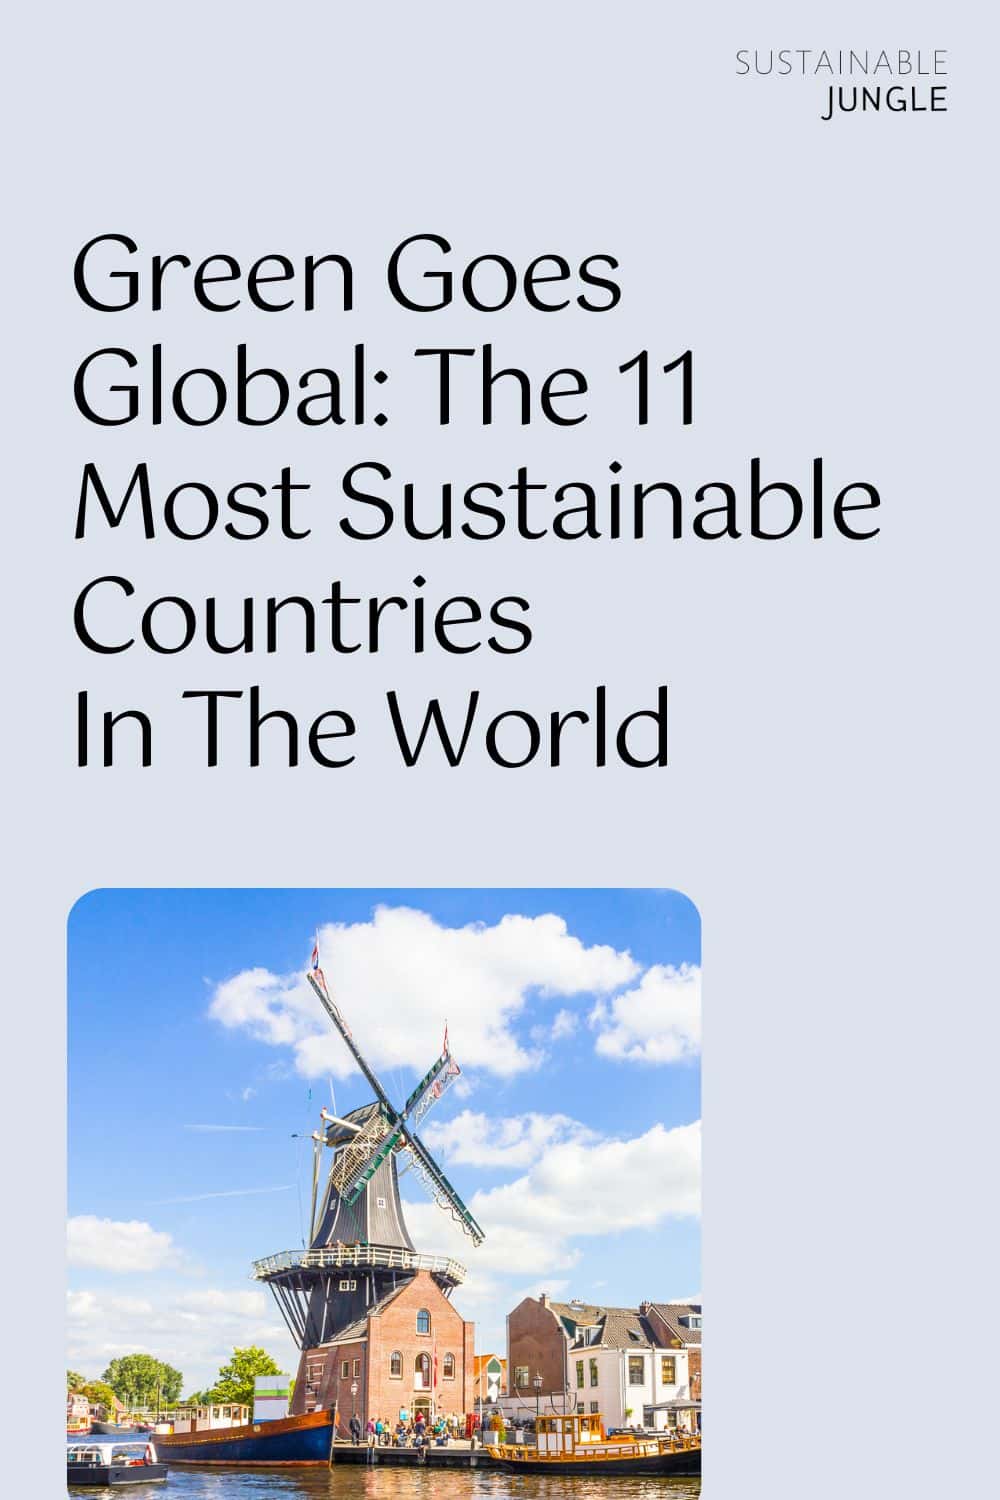 Green Goes Global: The 11 Most Sustainable Countries In The World Image by gianliguori #mostsustainablecountry #mostsustainablecountriesintheworld #greenstcountries #mostgreencountry #whatisthemostsustainablecountry #mostenvironmentallyfriendlycountries #sustainablejungle